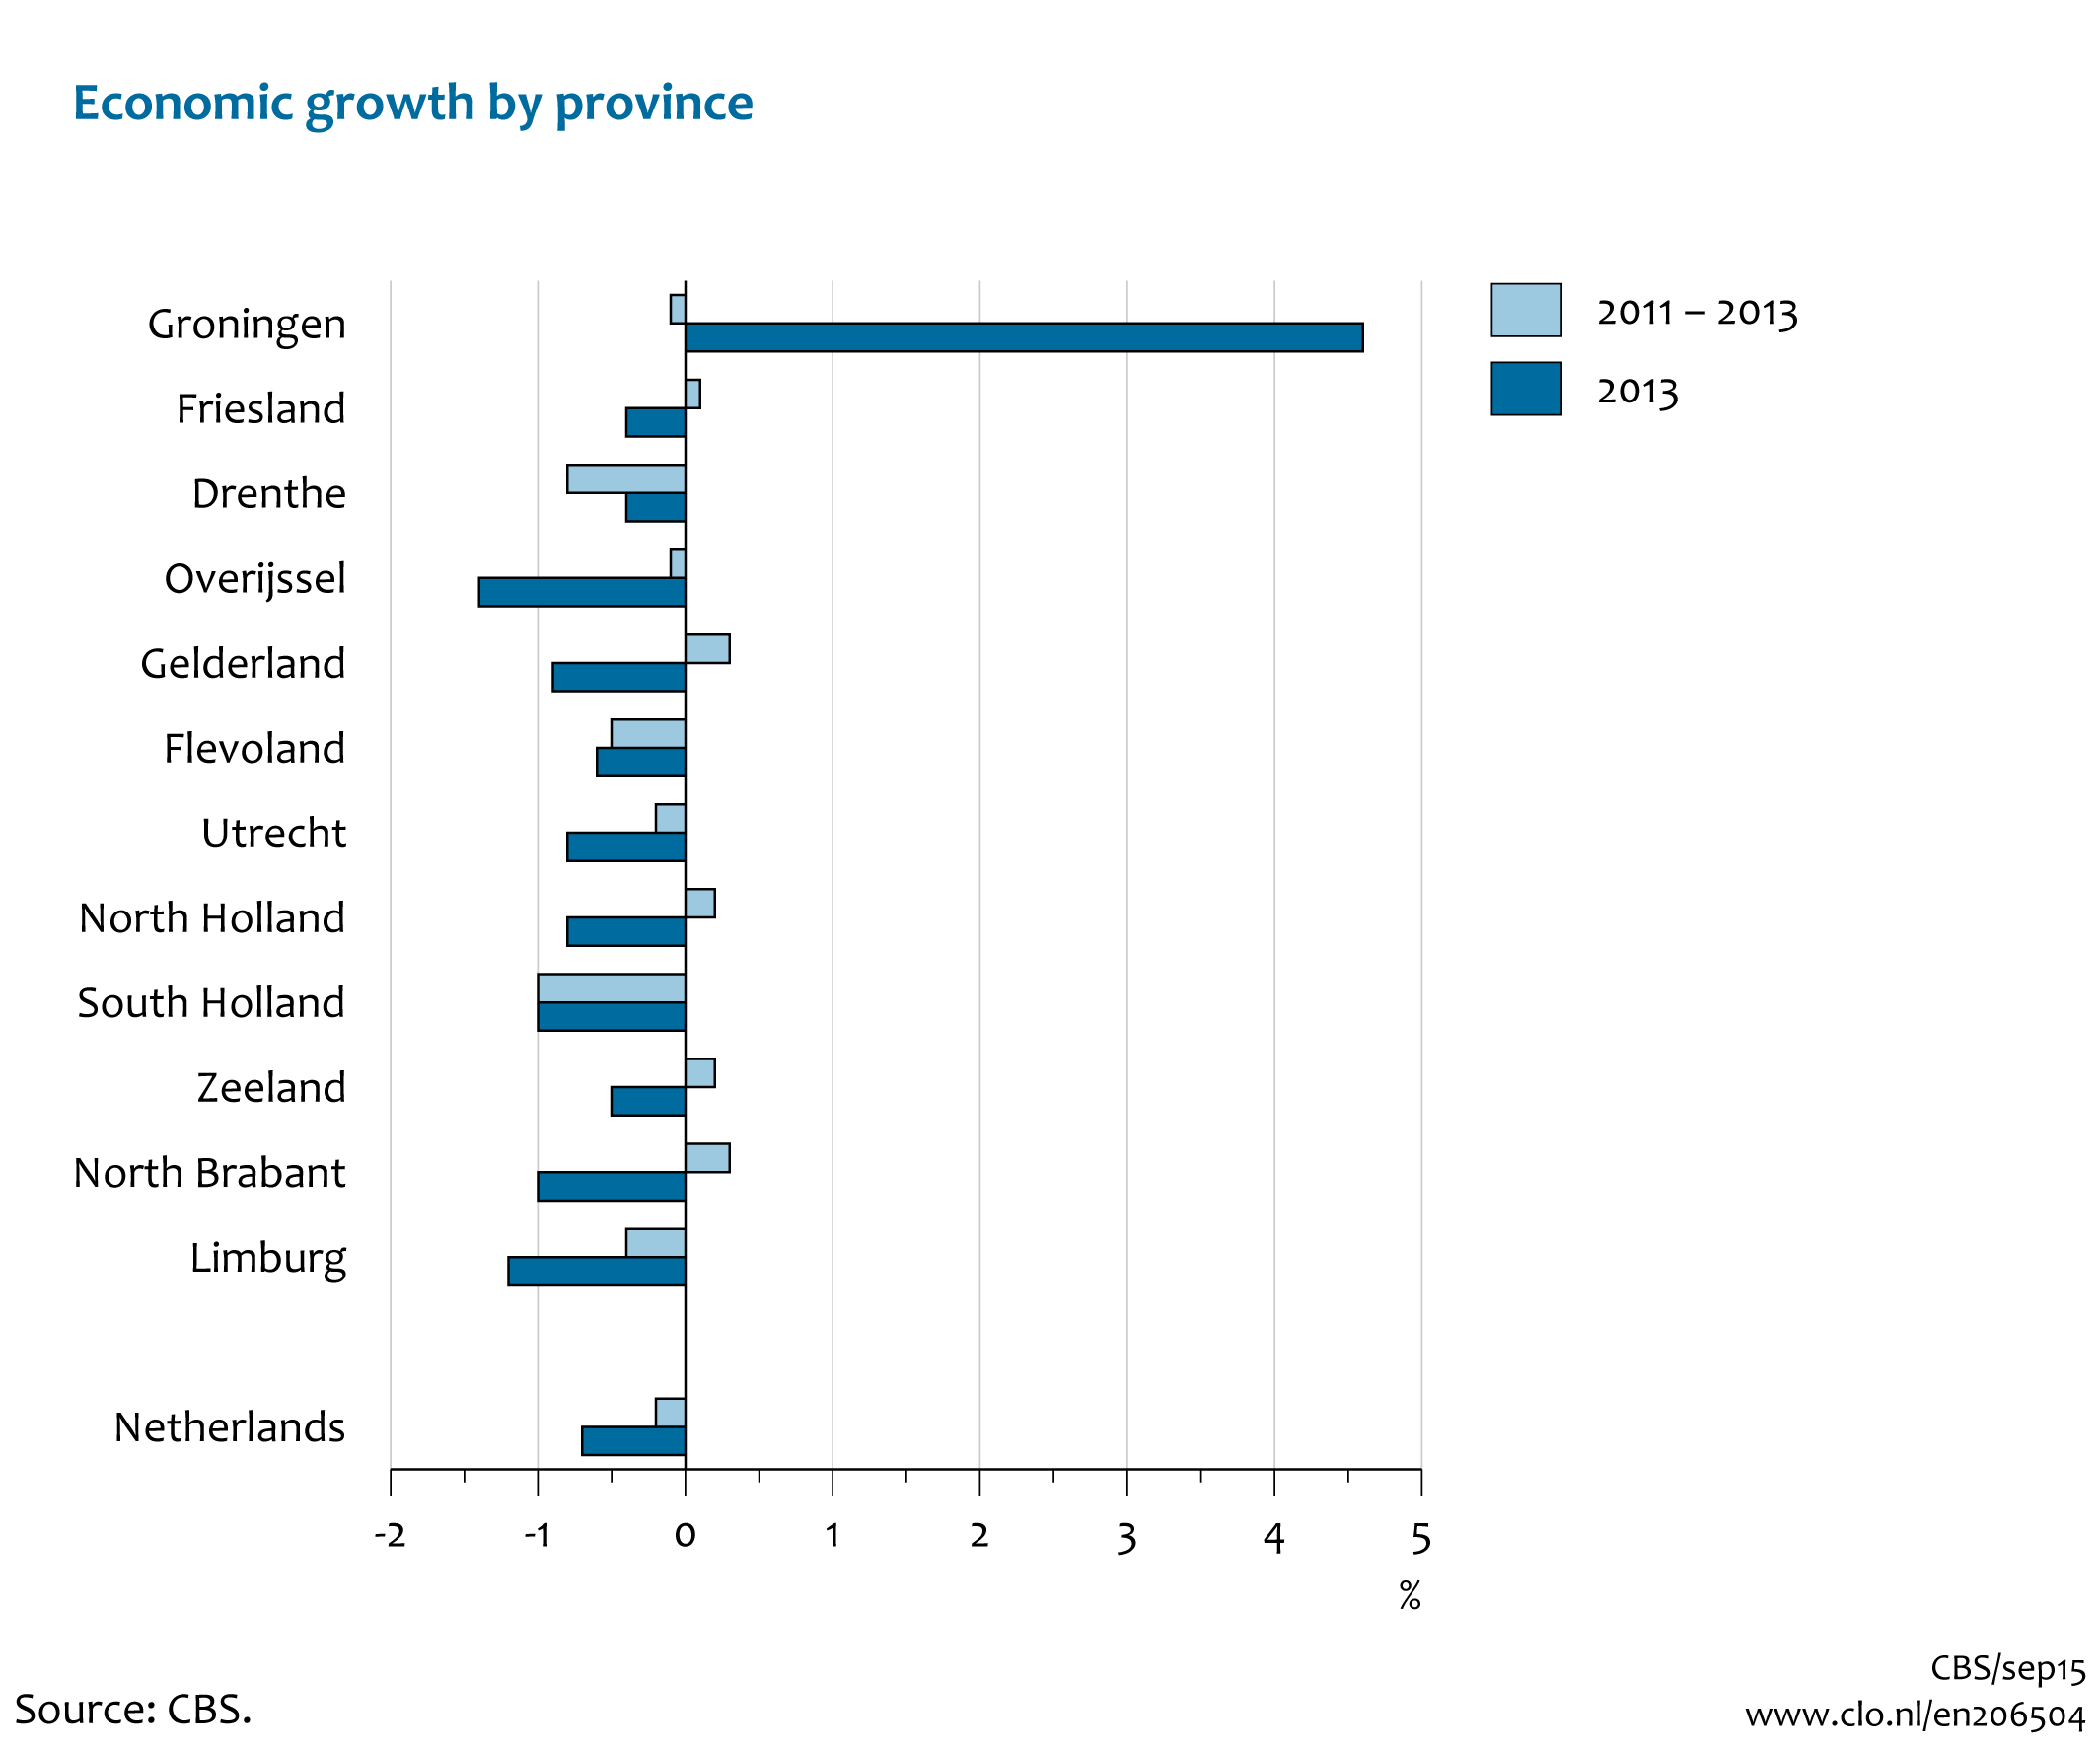 Image  Economische groei per provincie, 2011-2013. The image is further explained in the text.